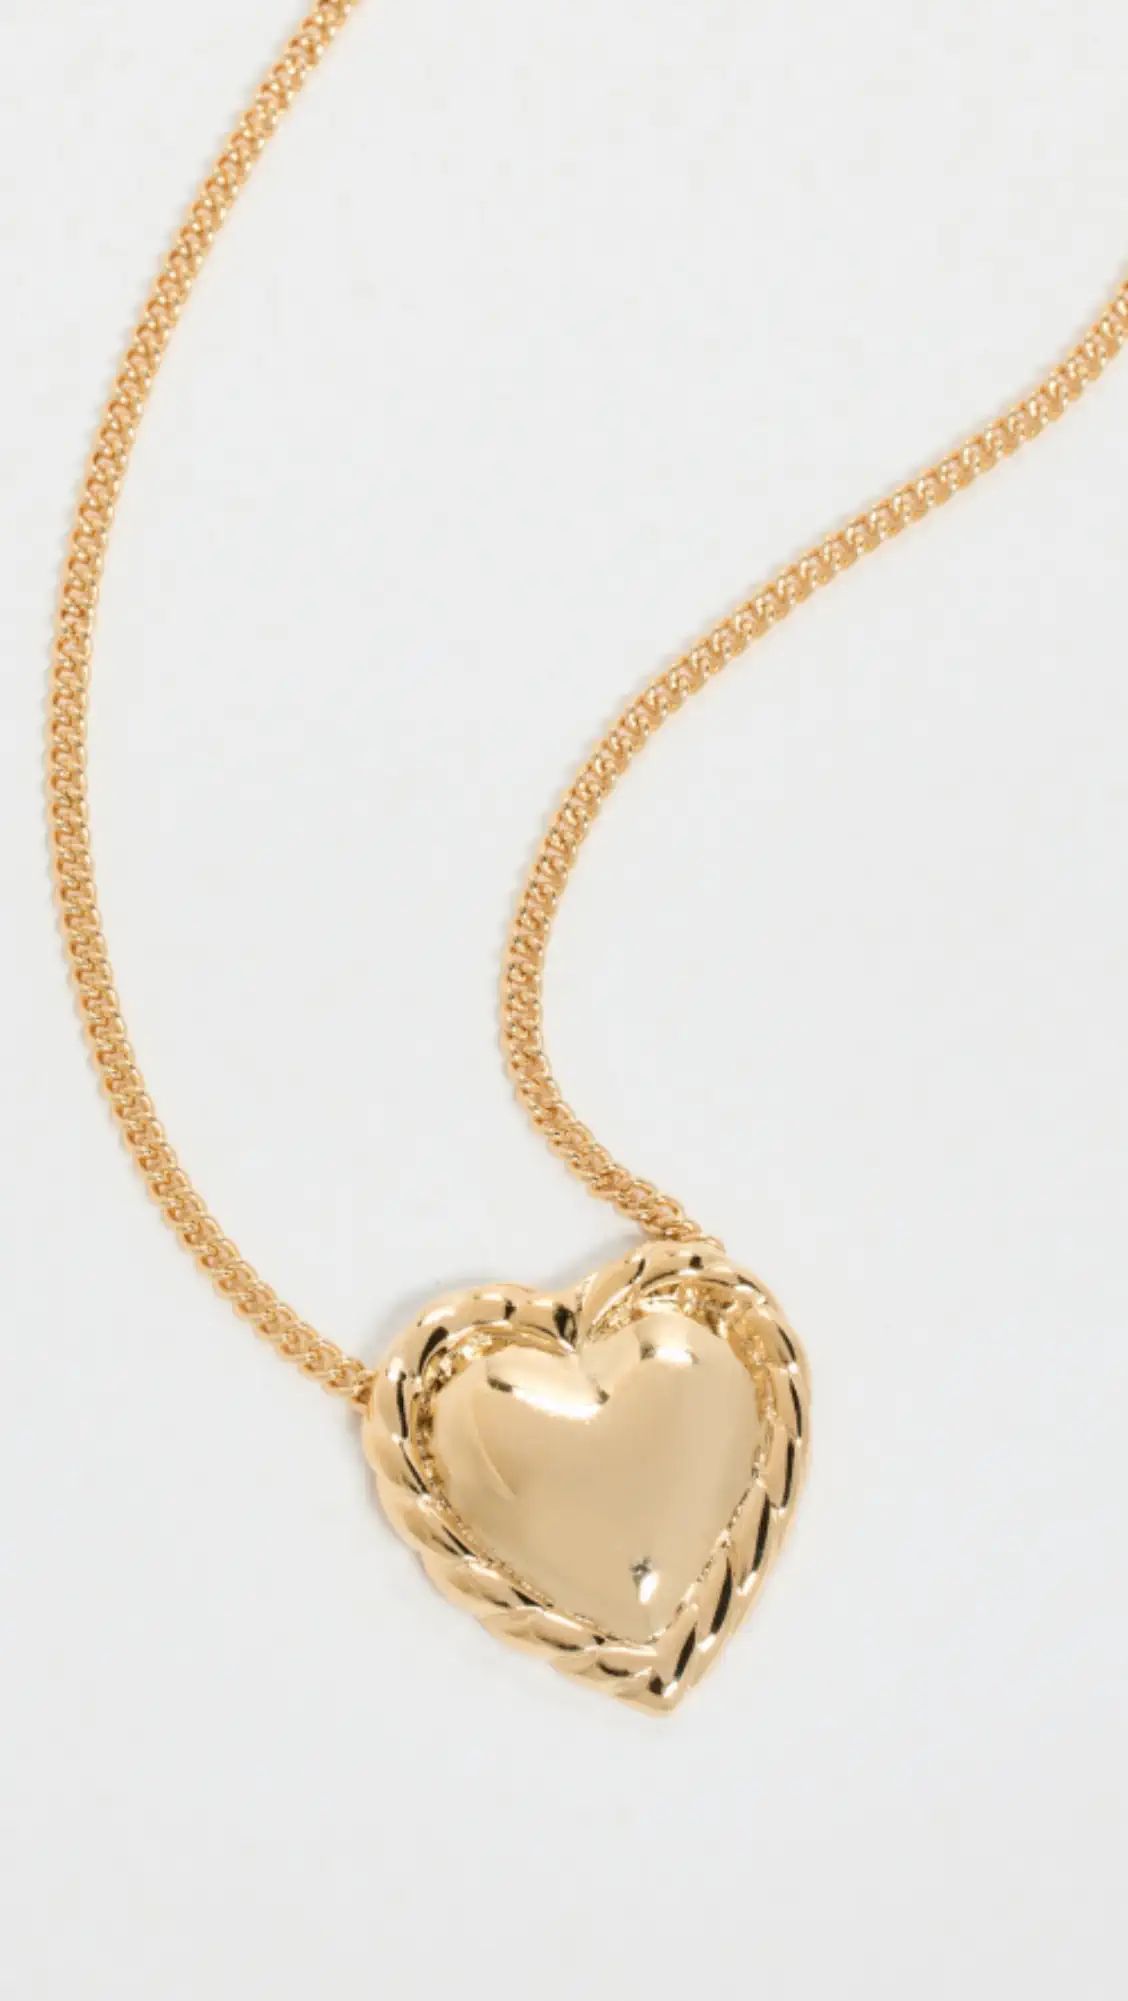 Kenneth Jay Lane Gold Chain with Heart Pendant Necklace | Shopbop | Shopbop